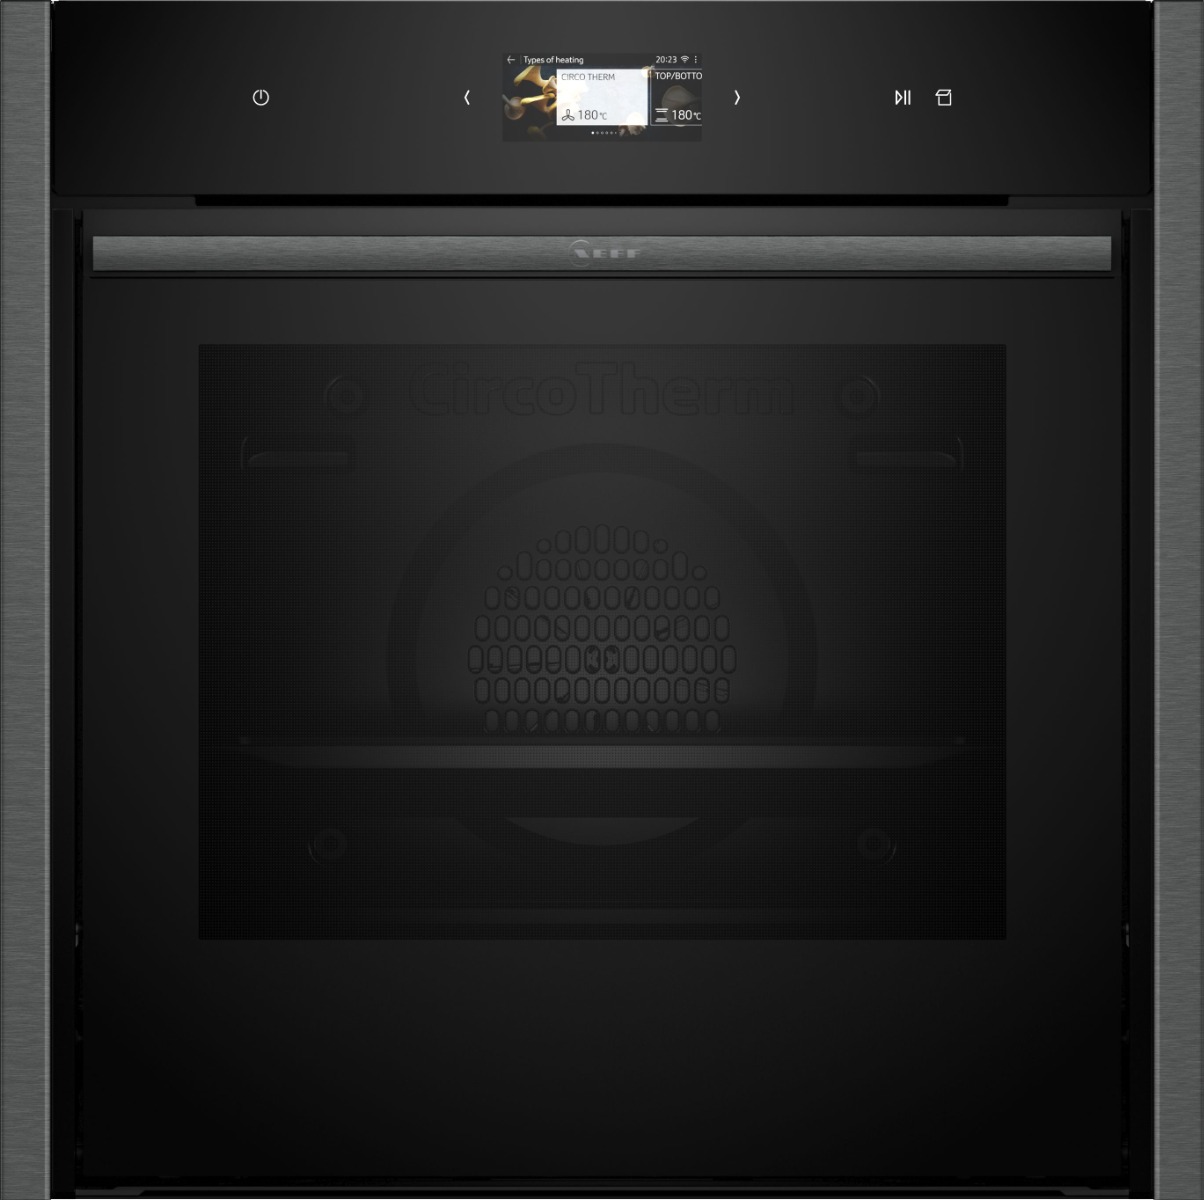 Neff B64FS31G0B Built-In Slide and Hide Single Oven - Black with Graphite-Grey Trim